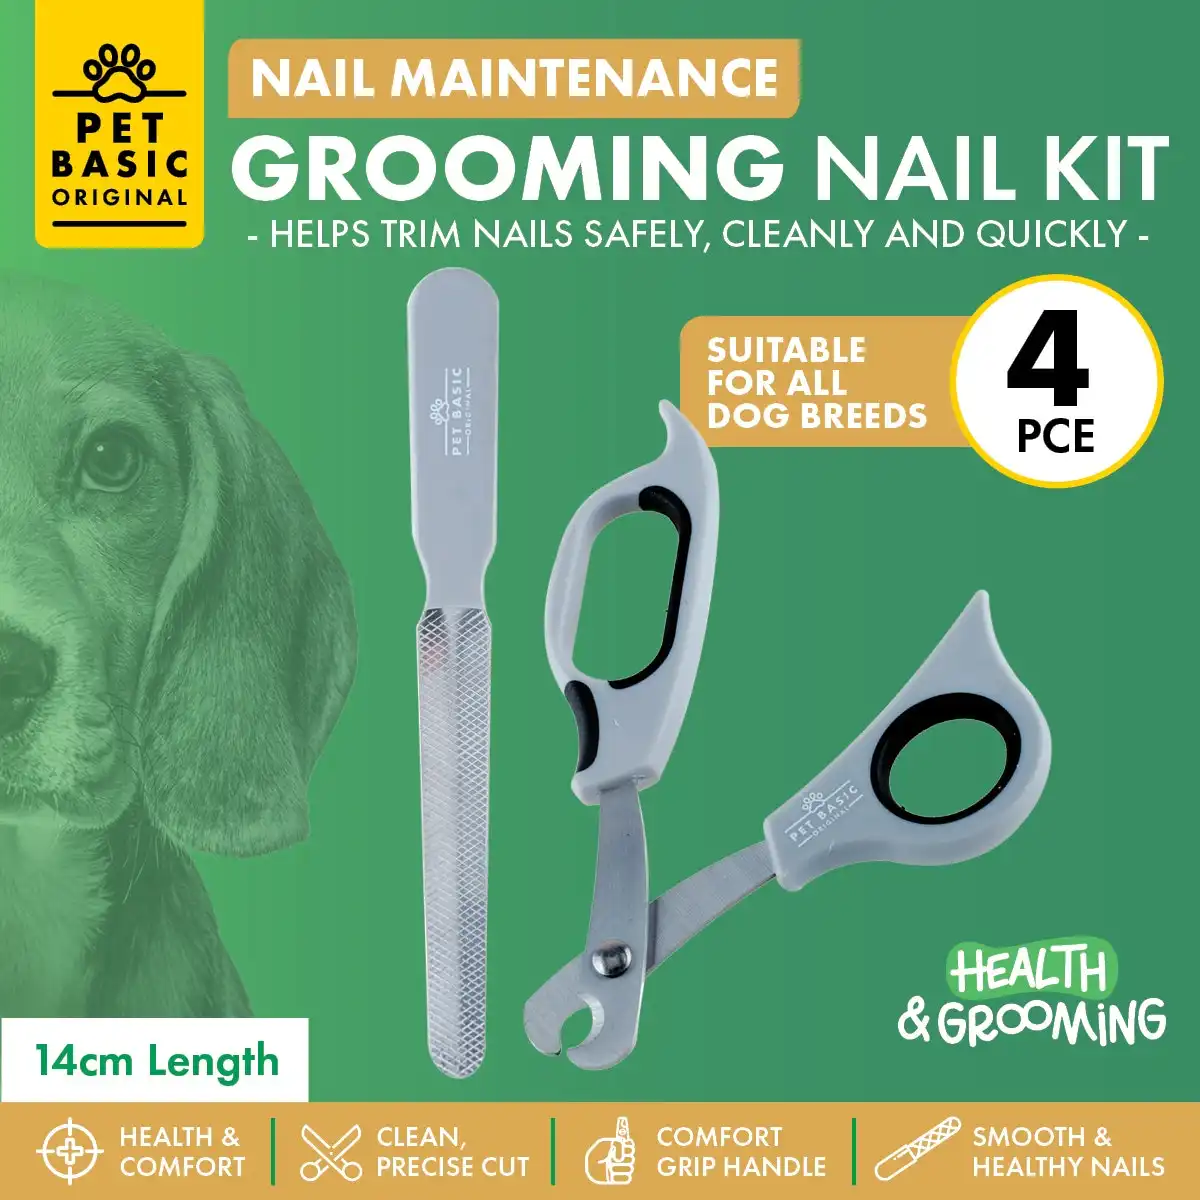 Pet Basic® 4PCE Nail Grooming Kit All Breeds Comfort Grip Handle 14cm